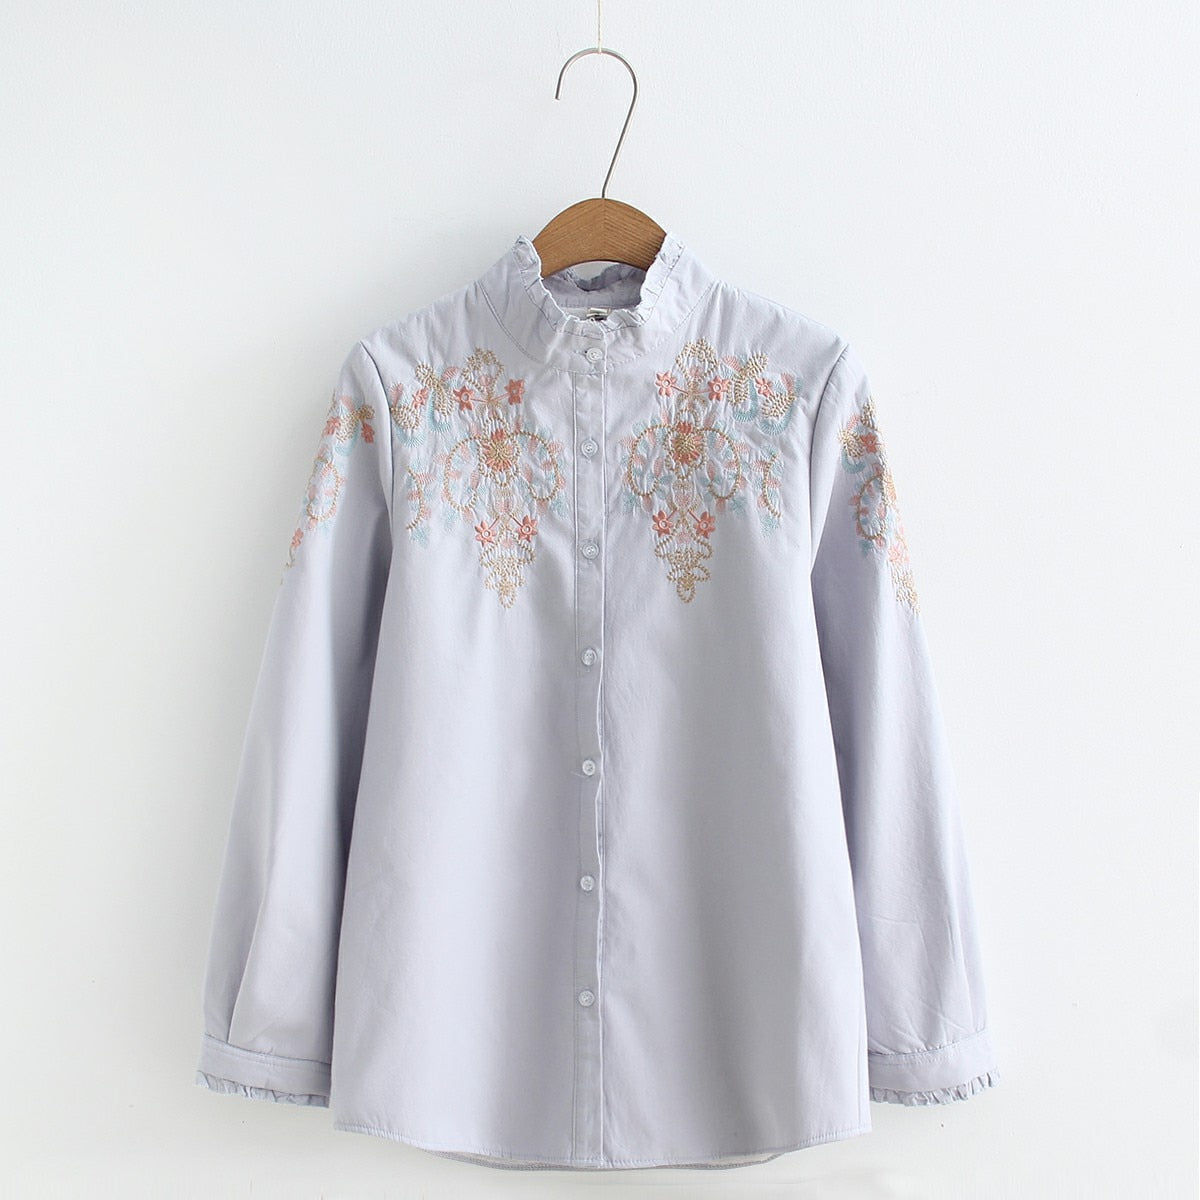 Women Embroidery Flower Blouse Slim Causal Shirts